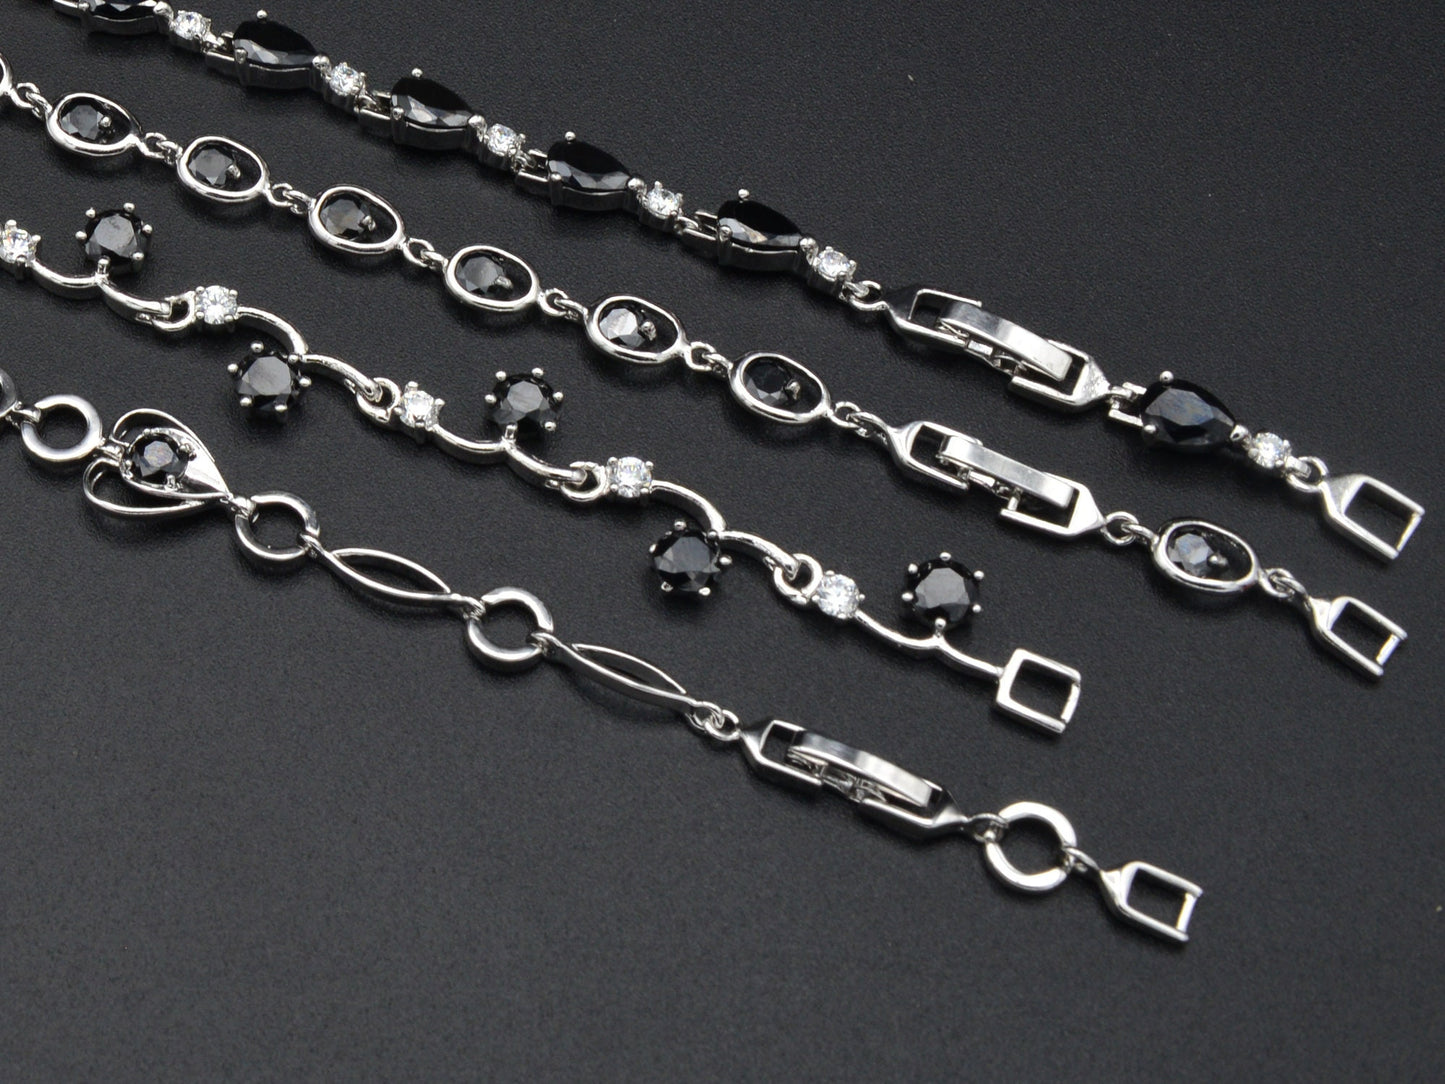 Women Silver Bracelet Rhodium Plated Chain With Black Cubic Zirconia bohemian Bling for Jewelry Making tarnish resistant